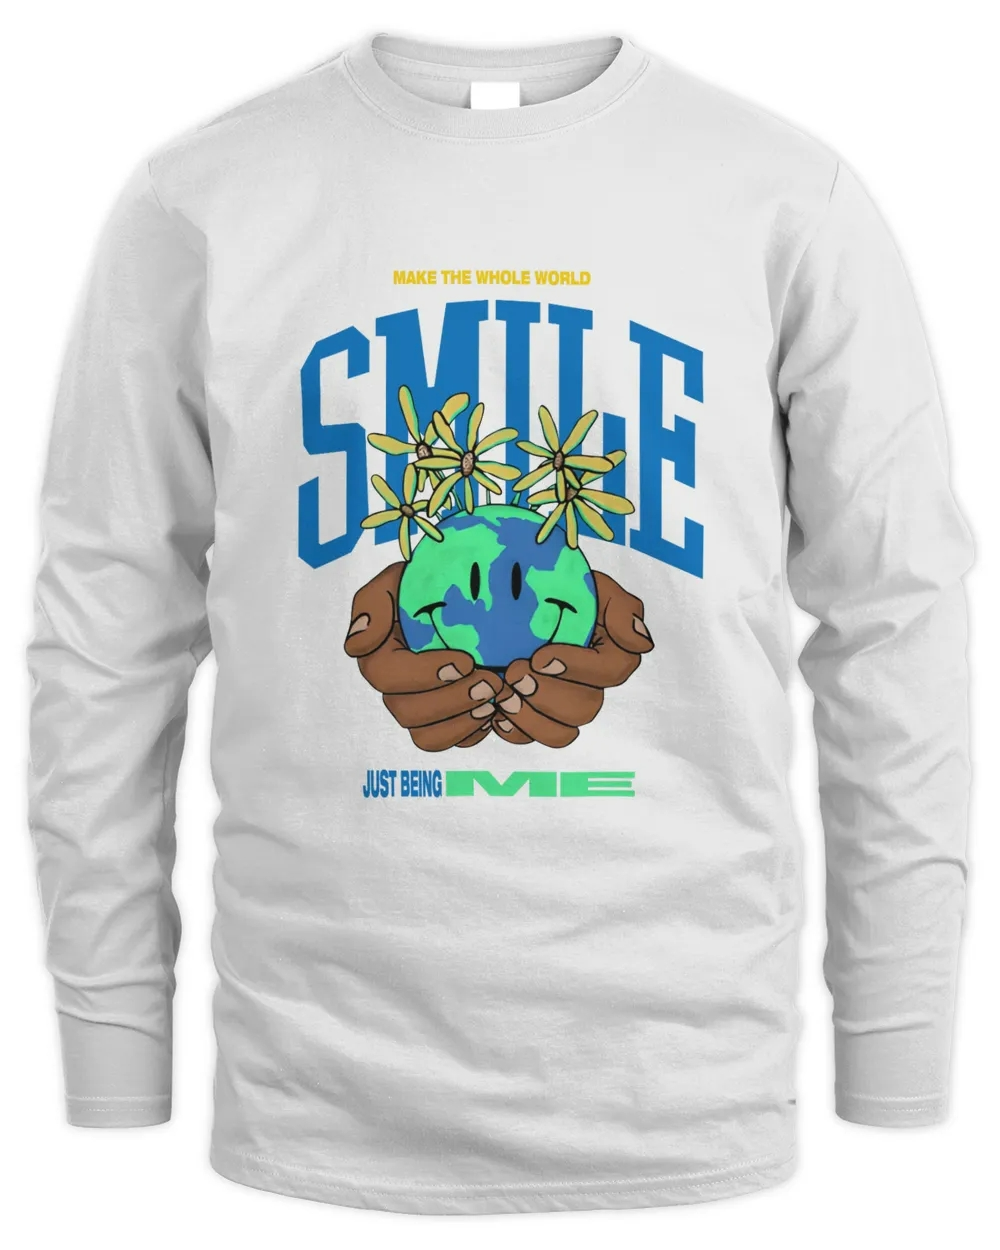 Make The Whole World Smile Just Being Me Sweatwear#1